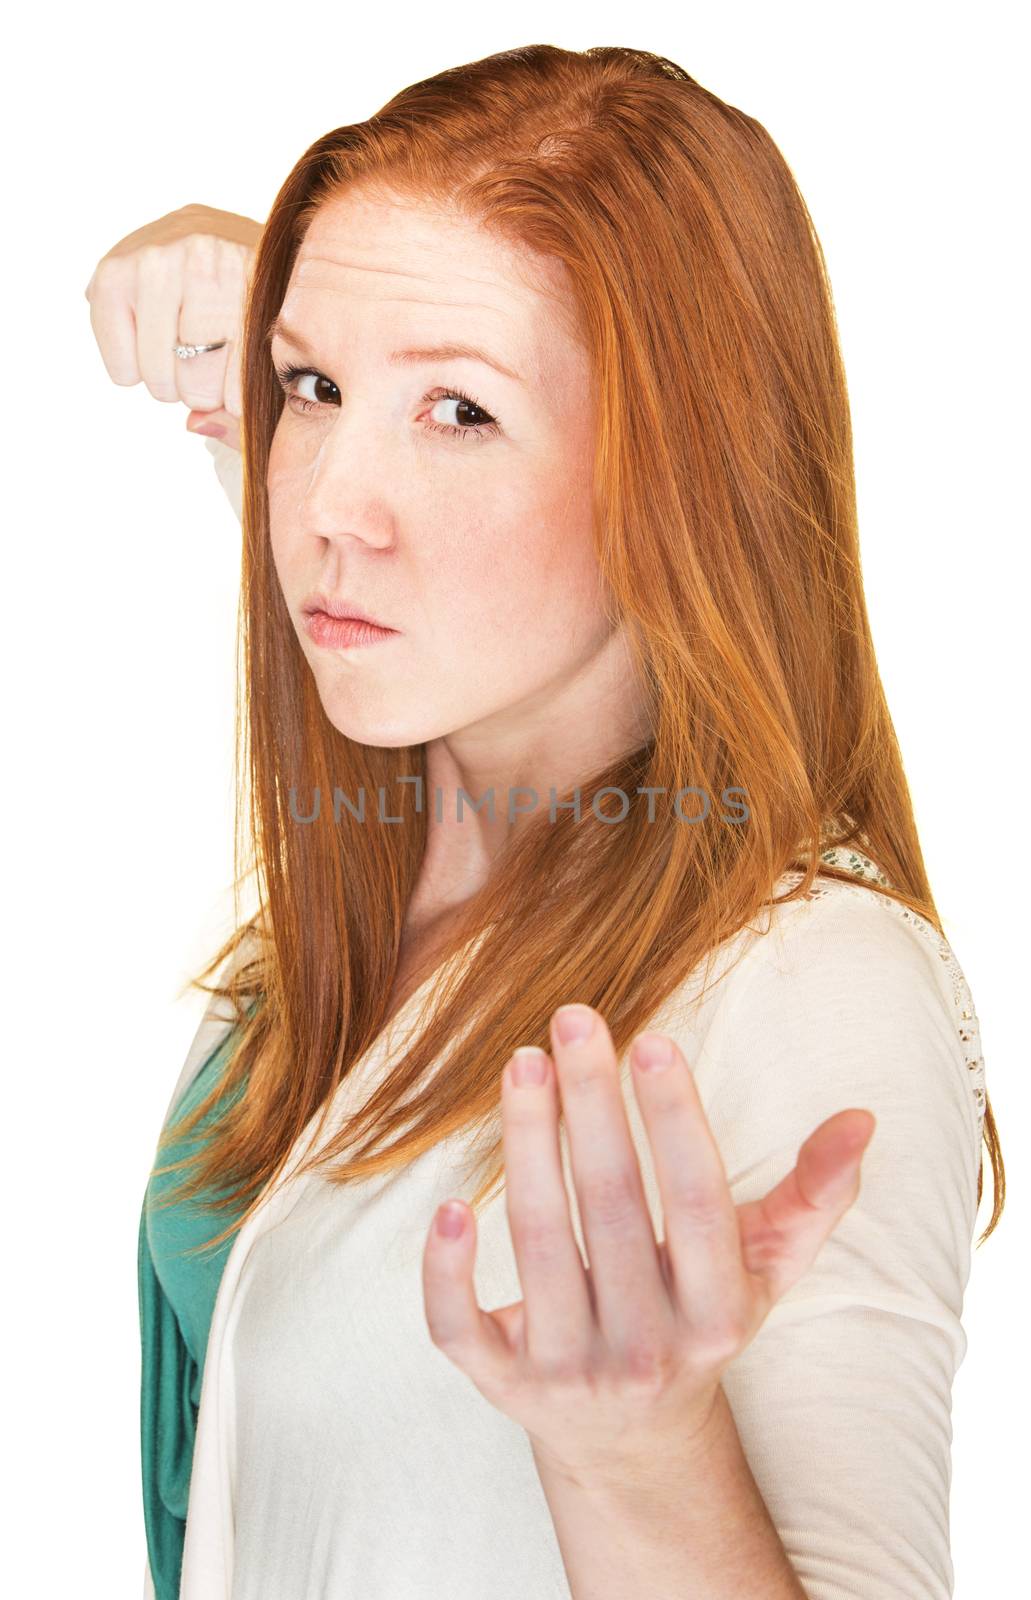 Isolated woman with threatening expression and clenched fist